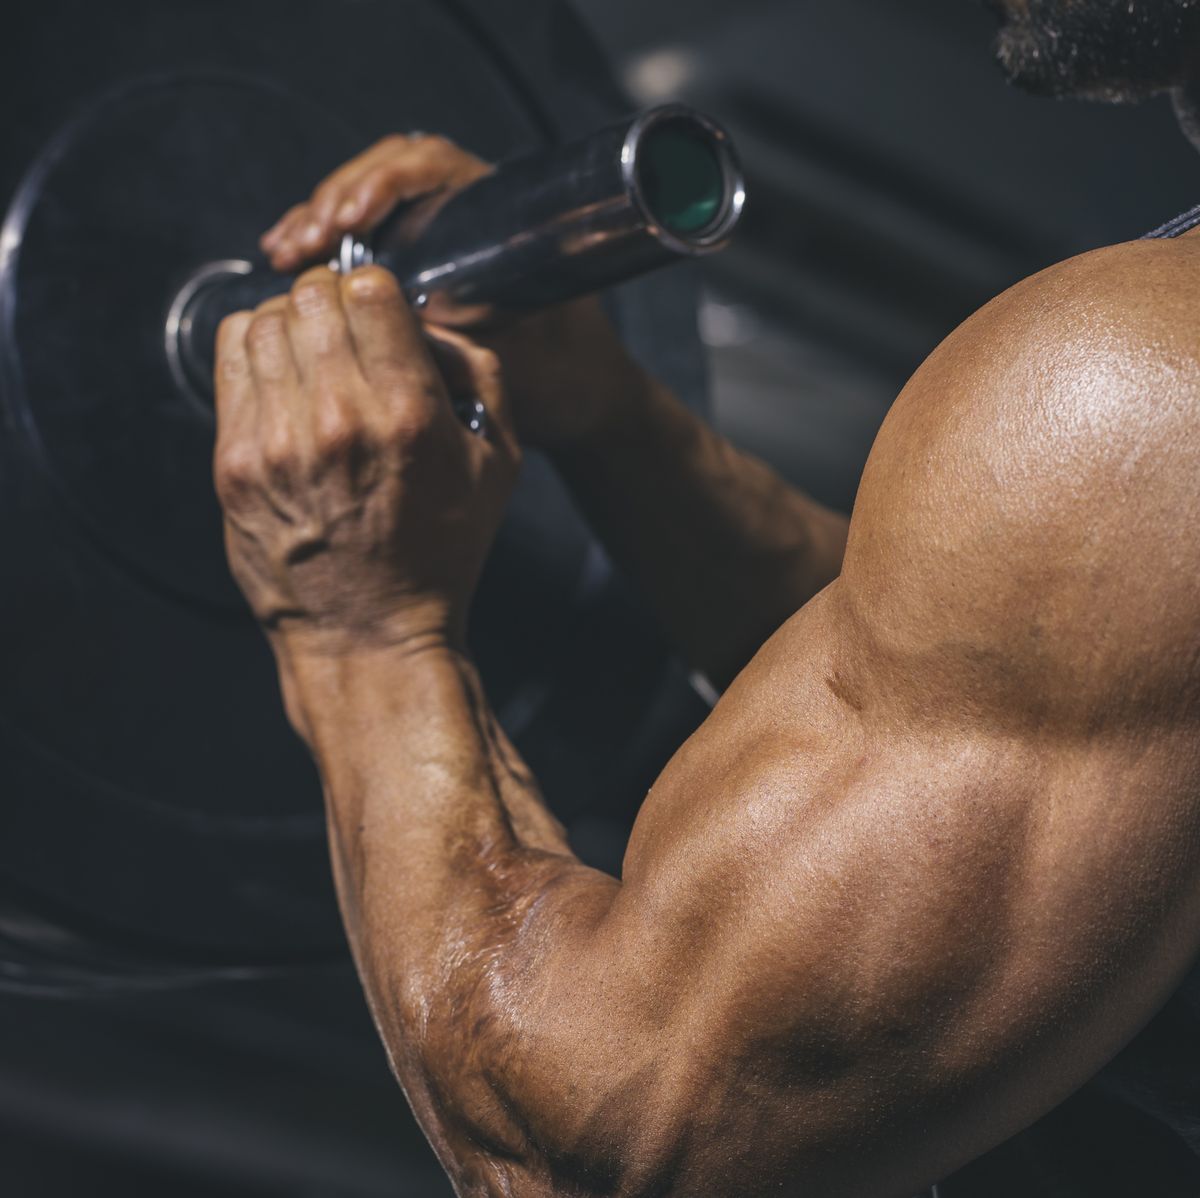 Get Big Arms with Triceps and Biceps Exercises - Men's Journal